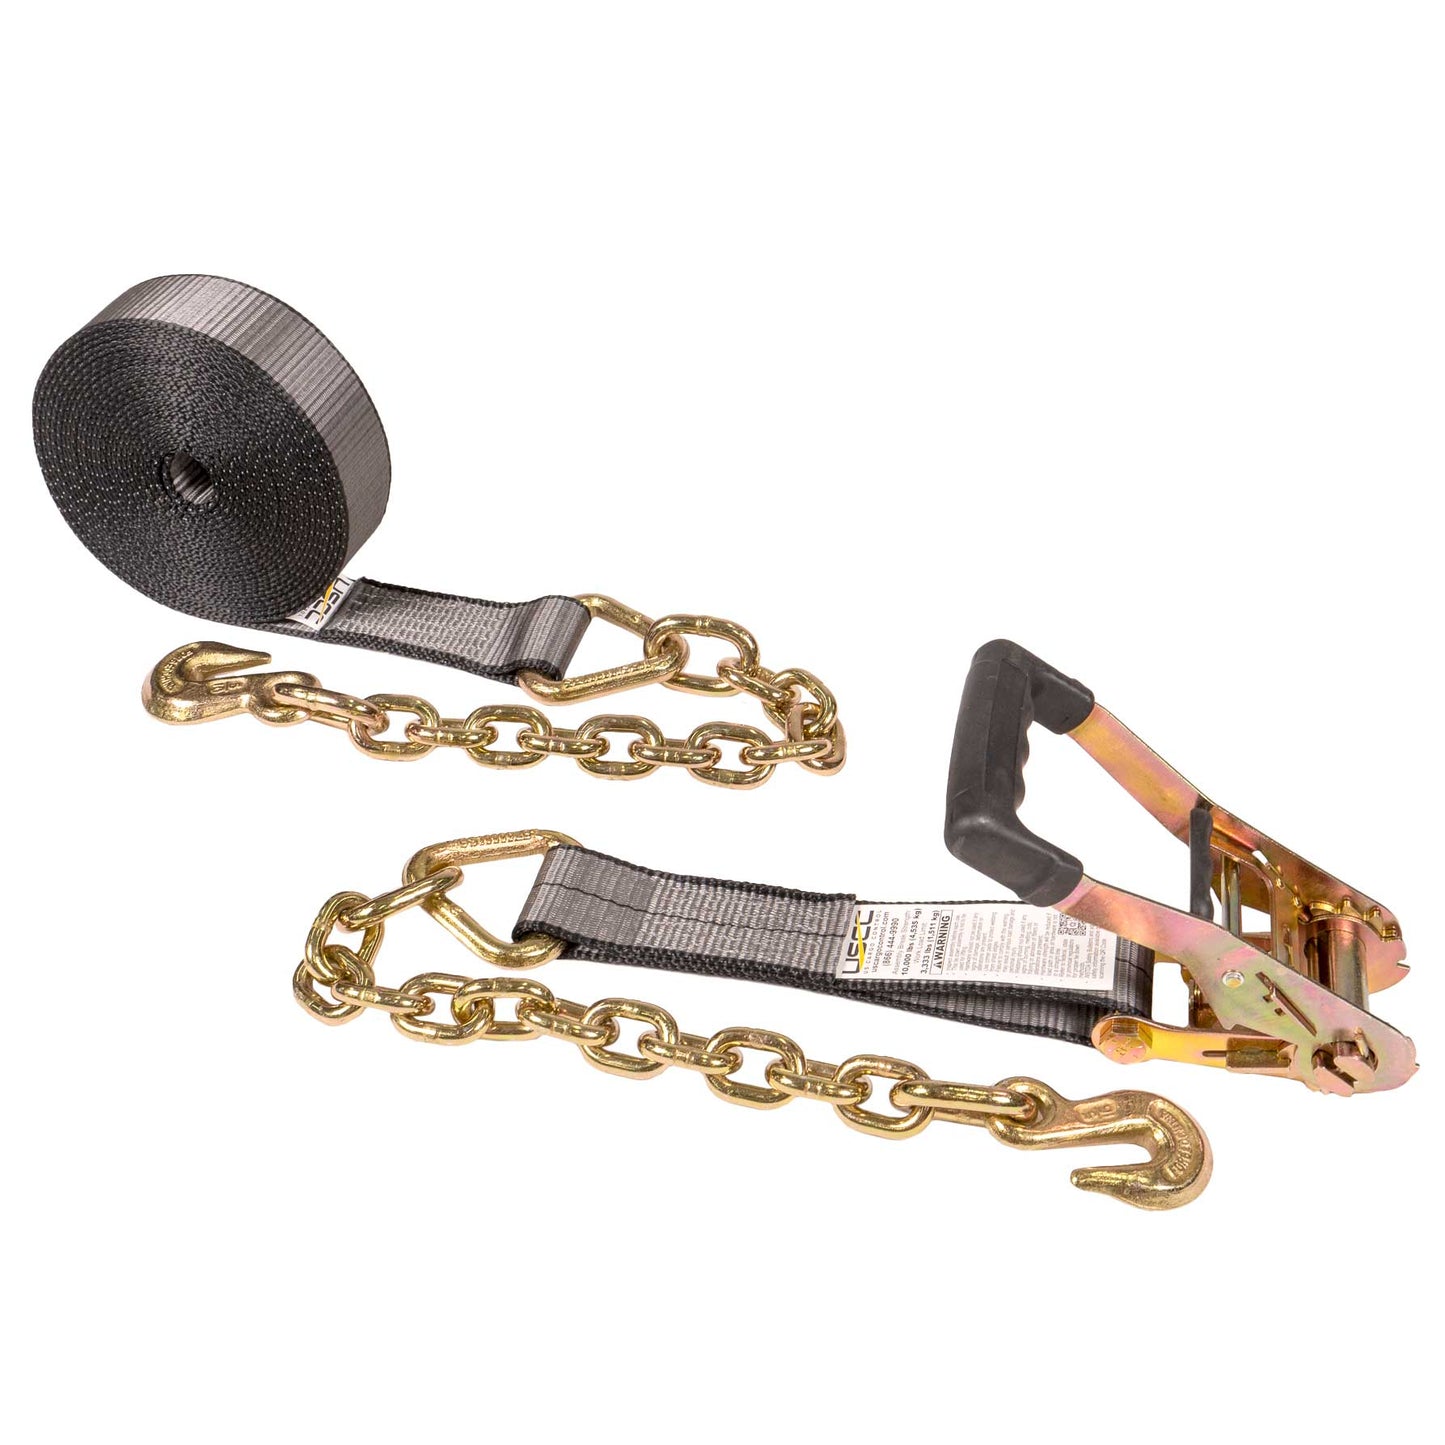 30' heavy-duty ratchet strap -  2" heavy duty blackline ratchet strap with chain extensions